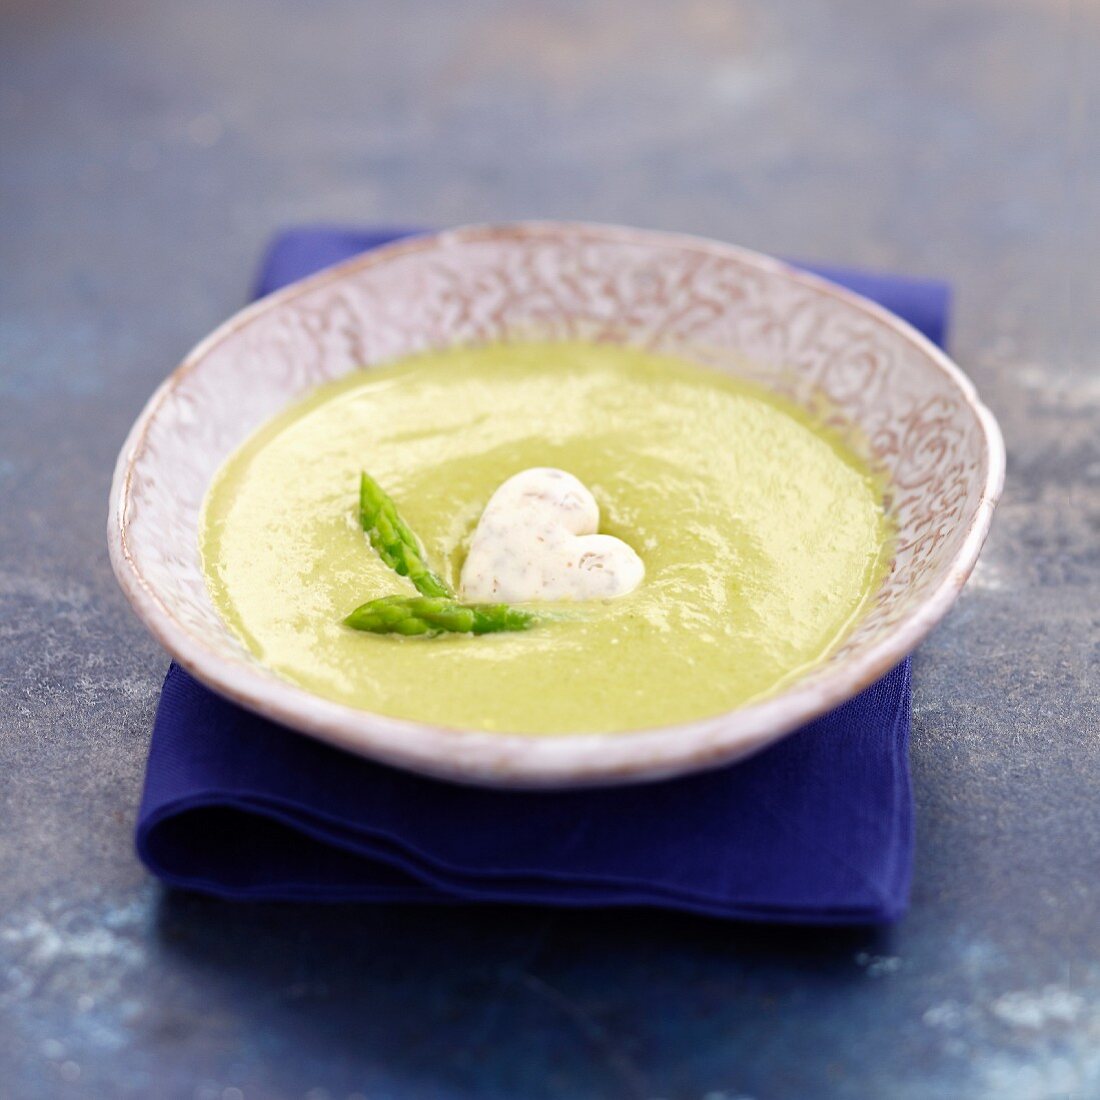 Cold cream of green asparagus soup with an almond-ginger ice cube